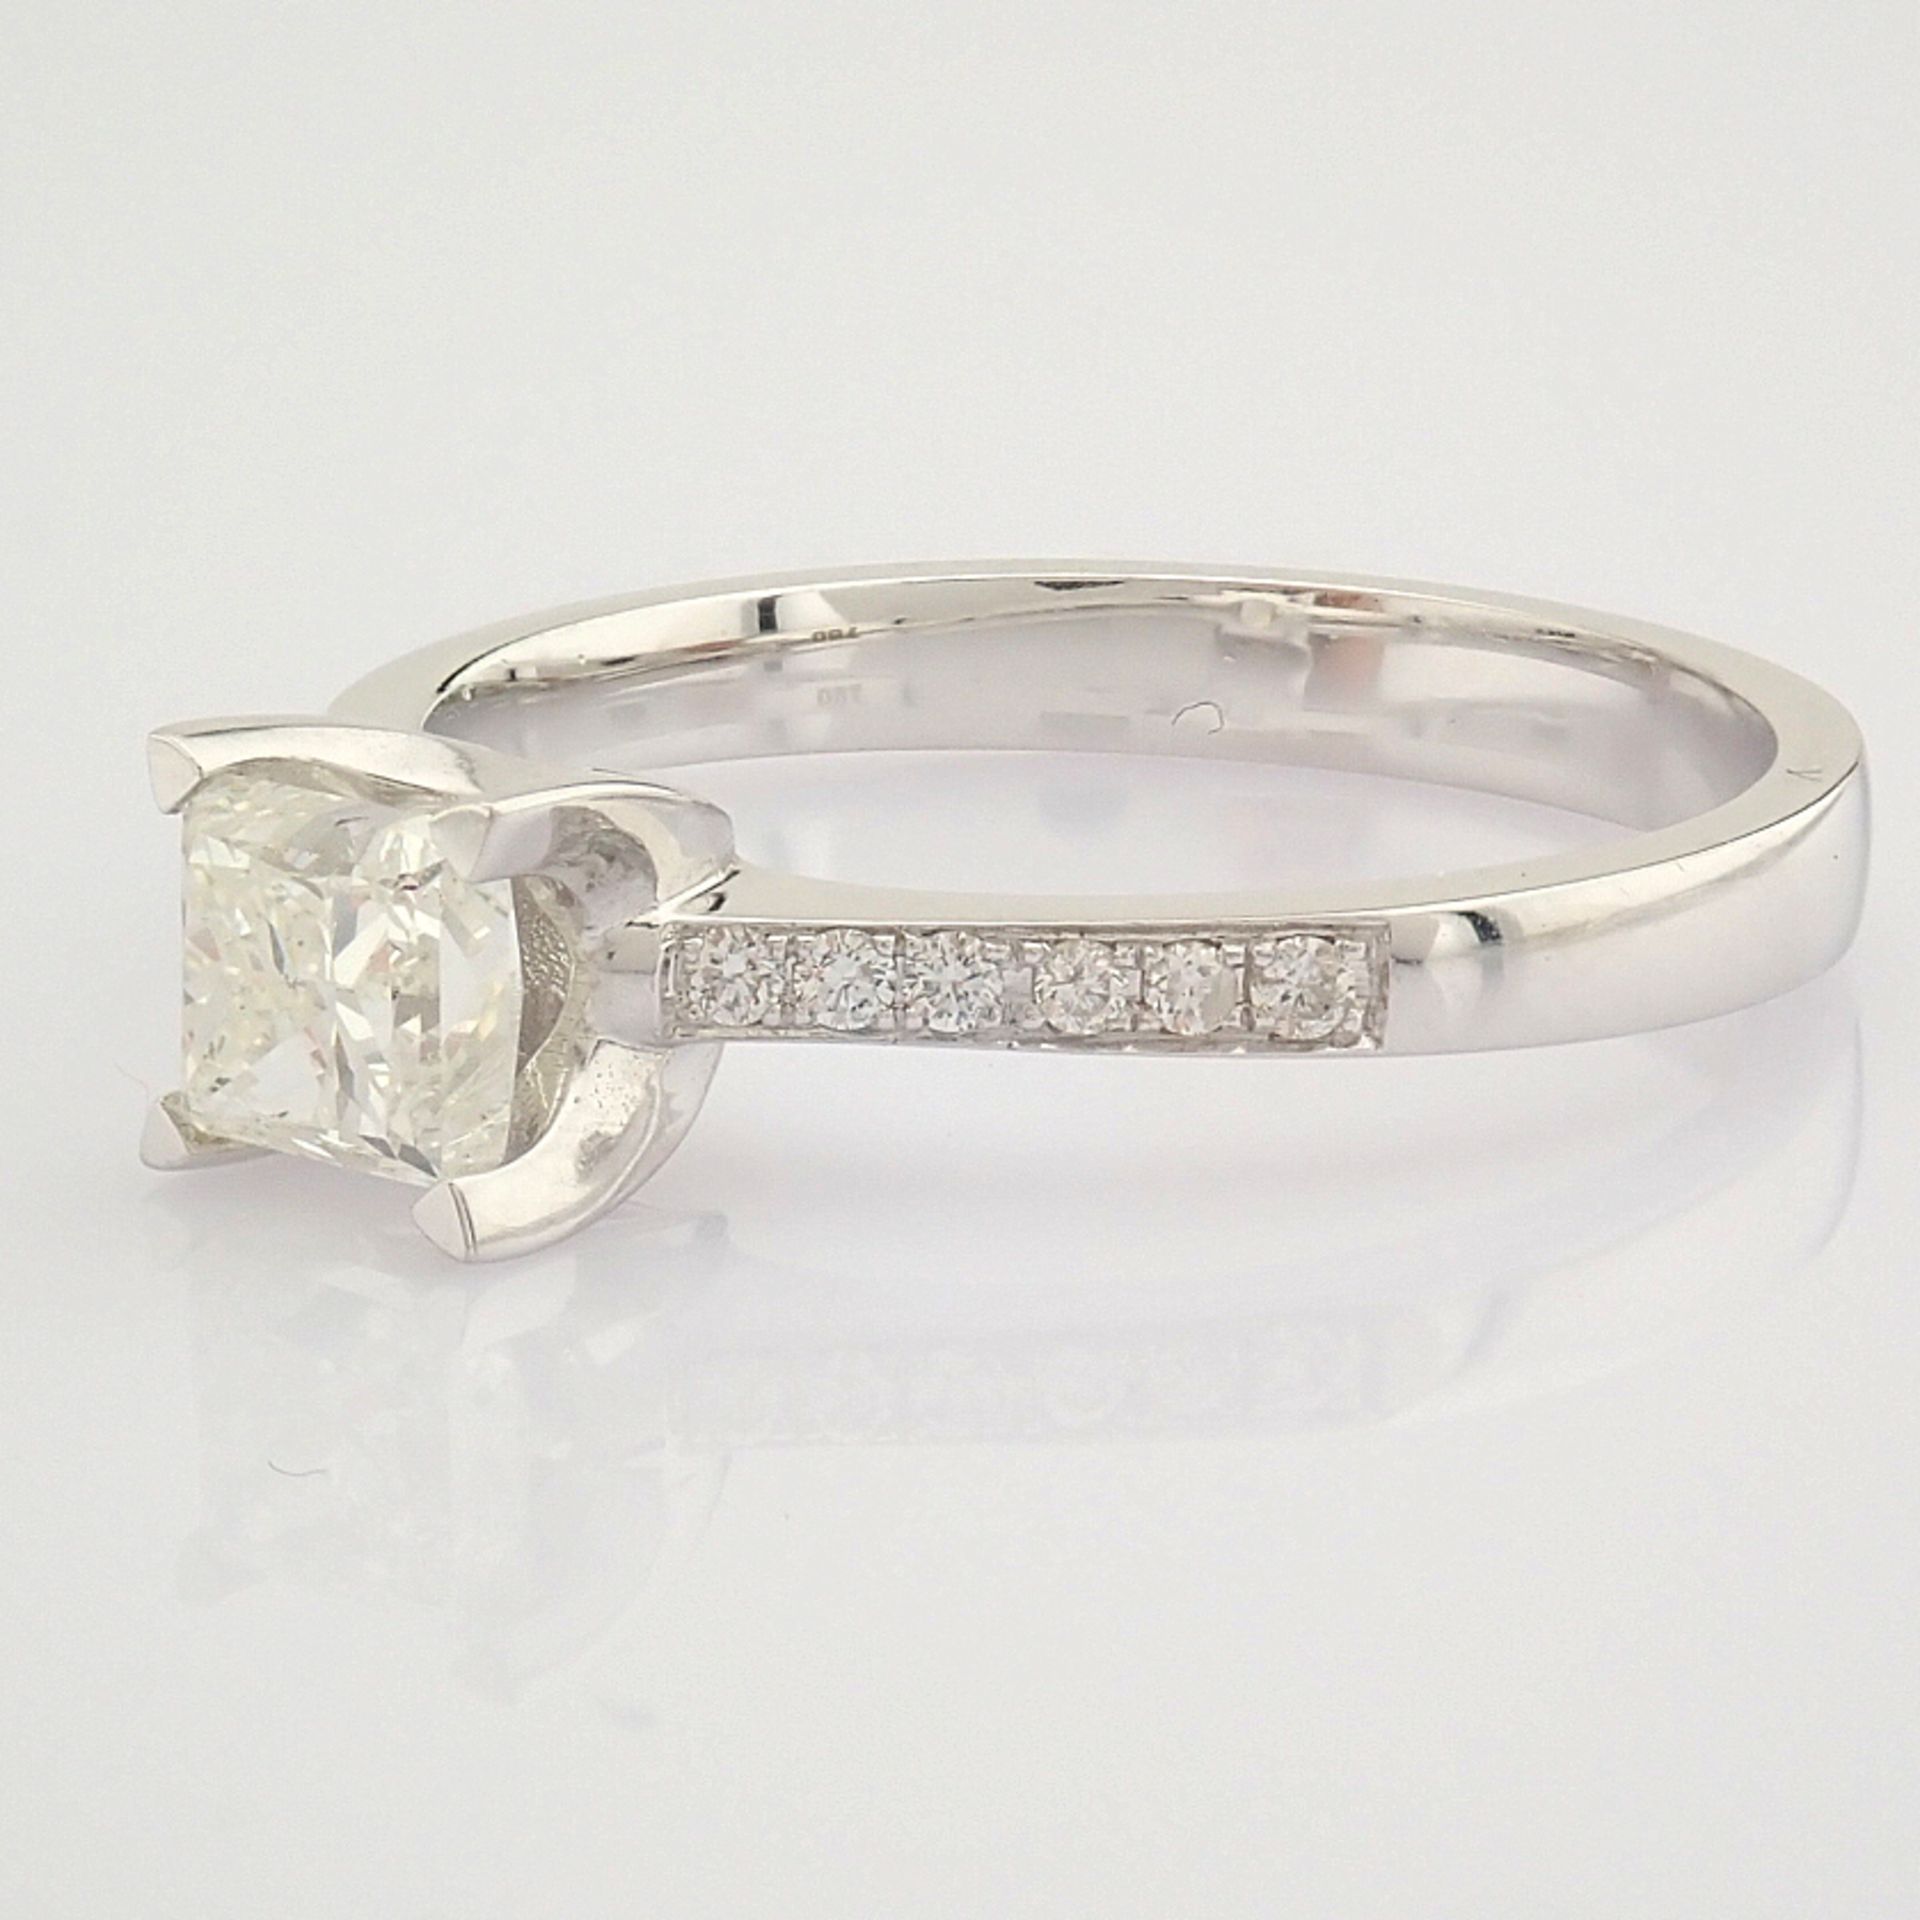 Certificated 18K White Gold Diamond Ring (Total 0.77 ct Stone) - Image 7 of 9